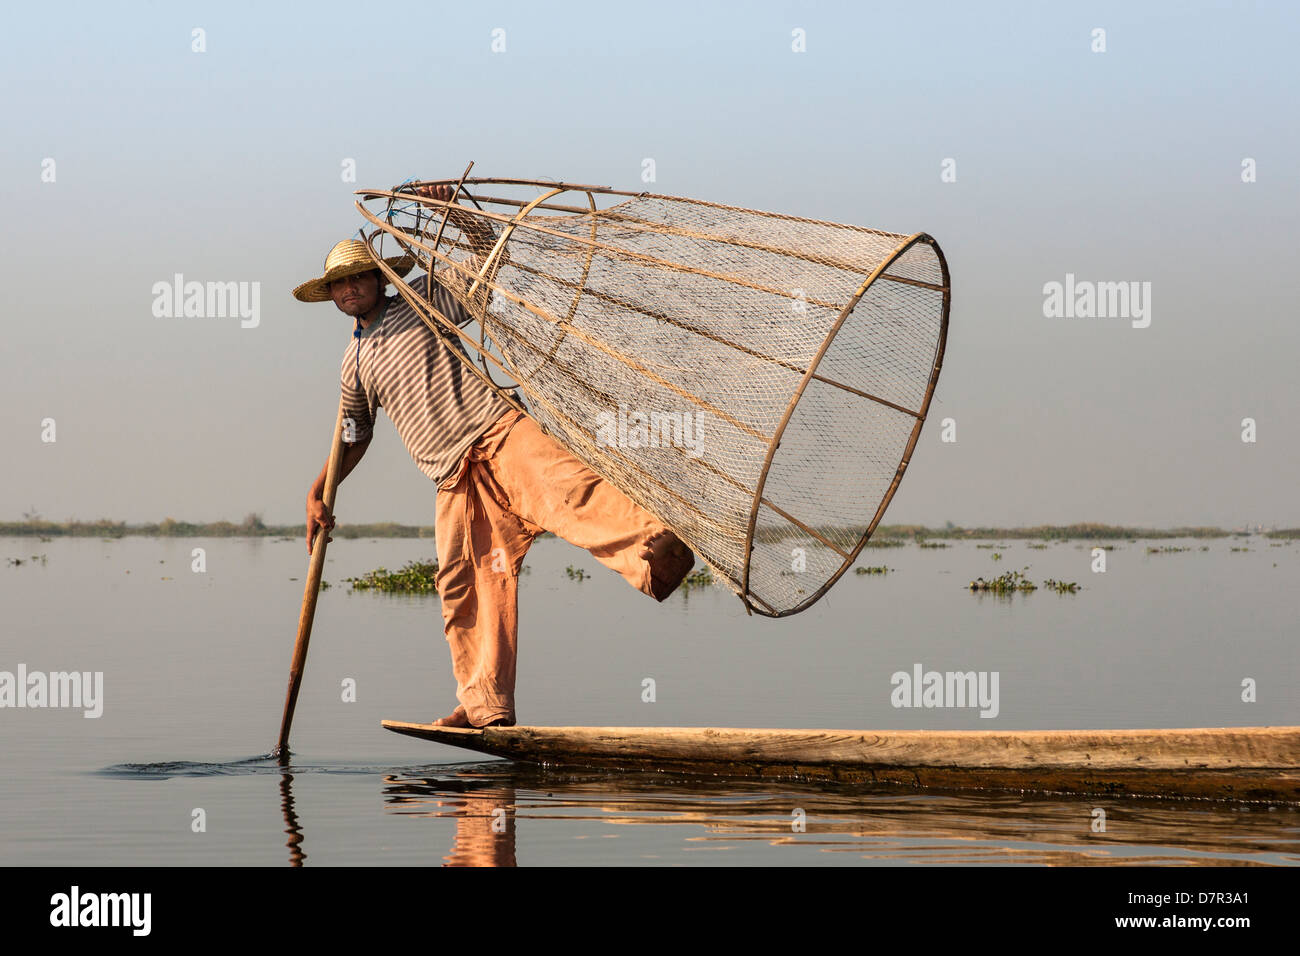 High Quality Stock Photos of fishing nets